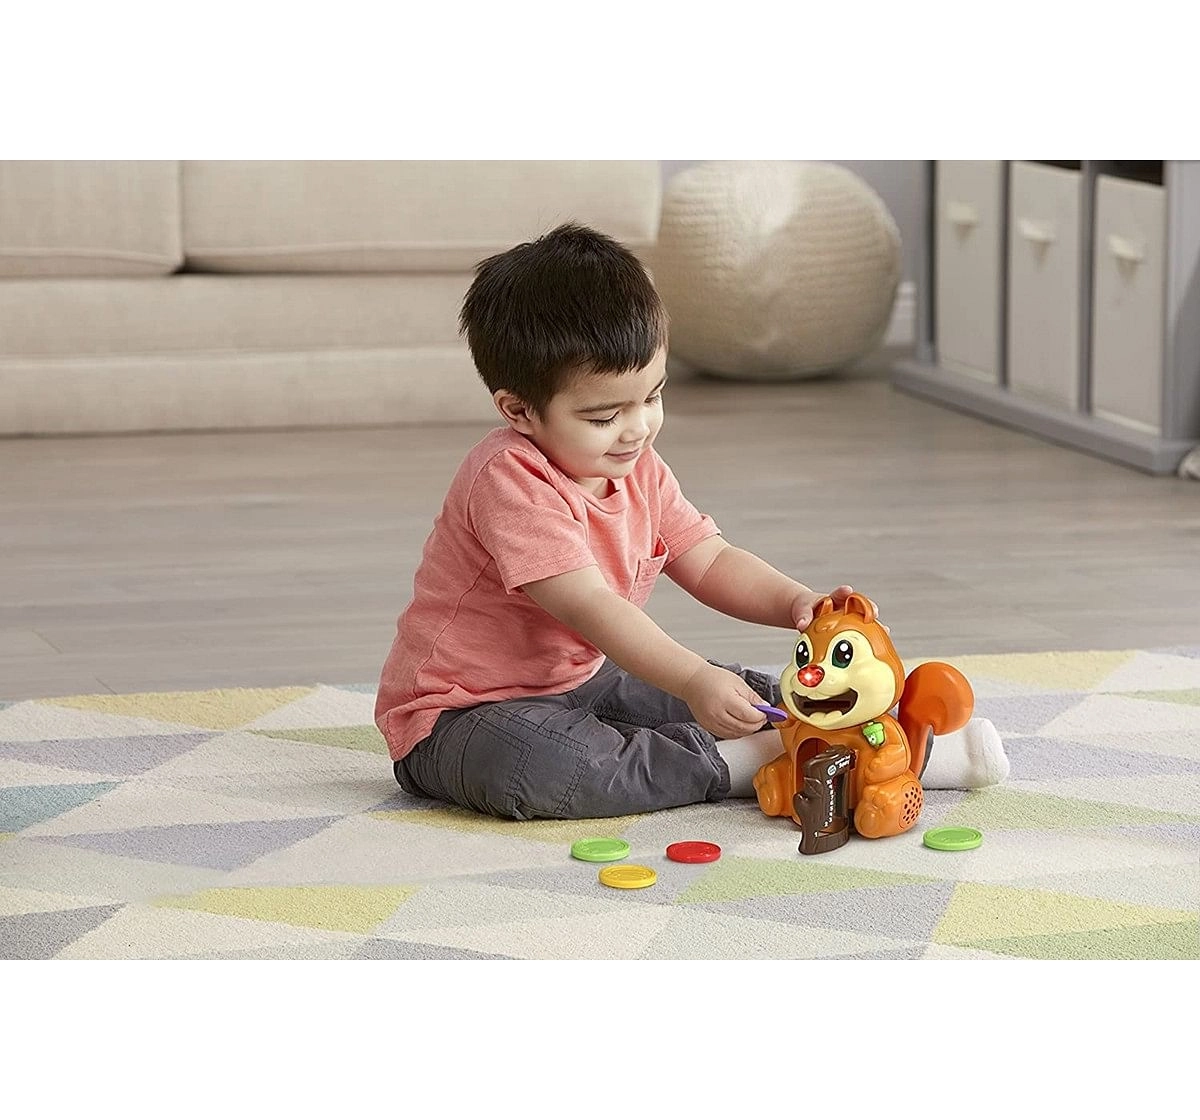 Leap Frog  Number Crunchin Squirrel Learning Toys for Kids age 2Y+ (Brown)